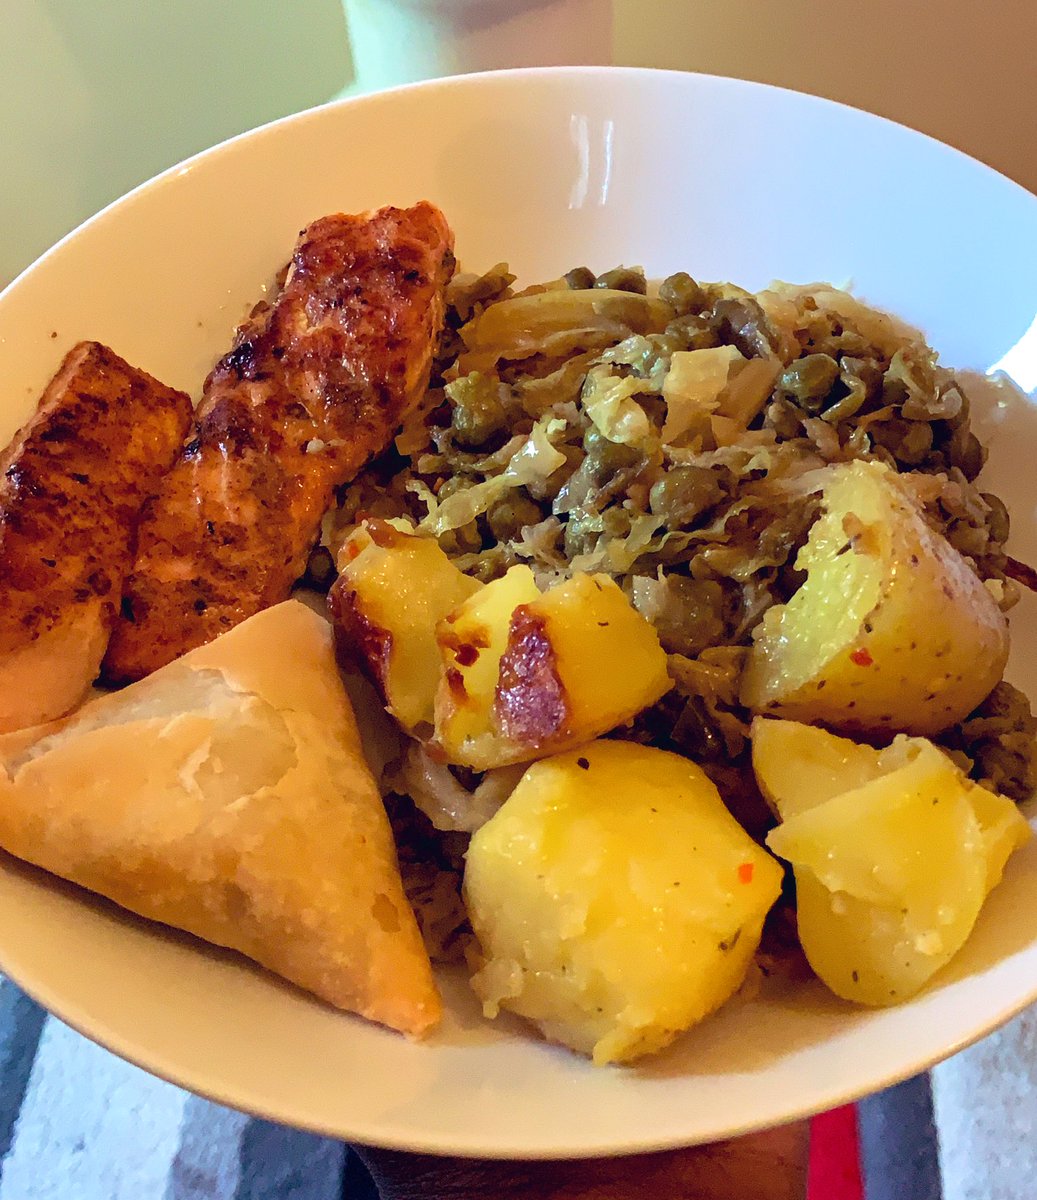 My abit-of-everything plate.Veg samosa, boiled then roasted potatoes, steamed cabbage & peas, grilled salmon. 